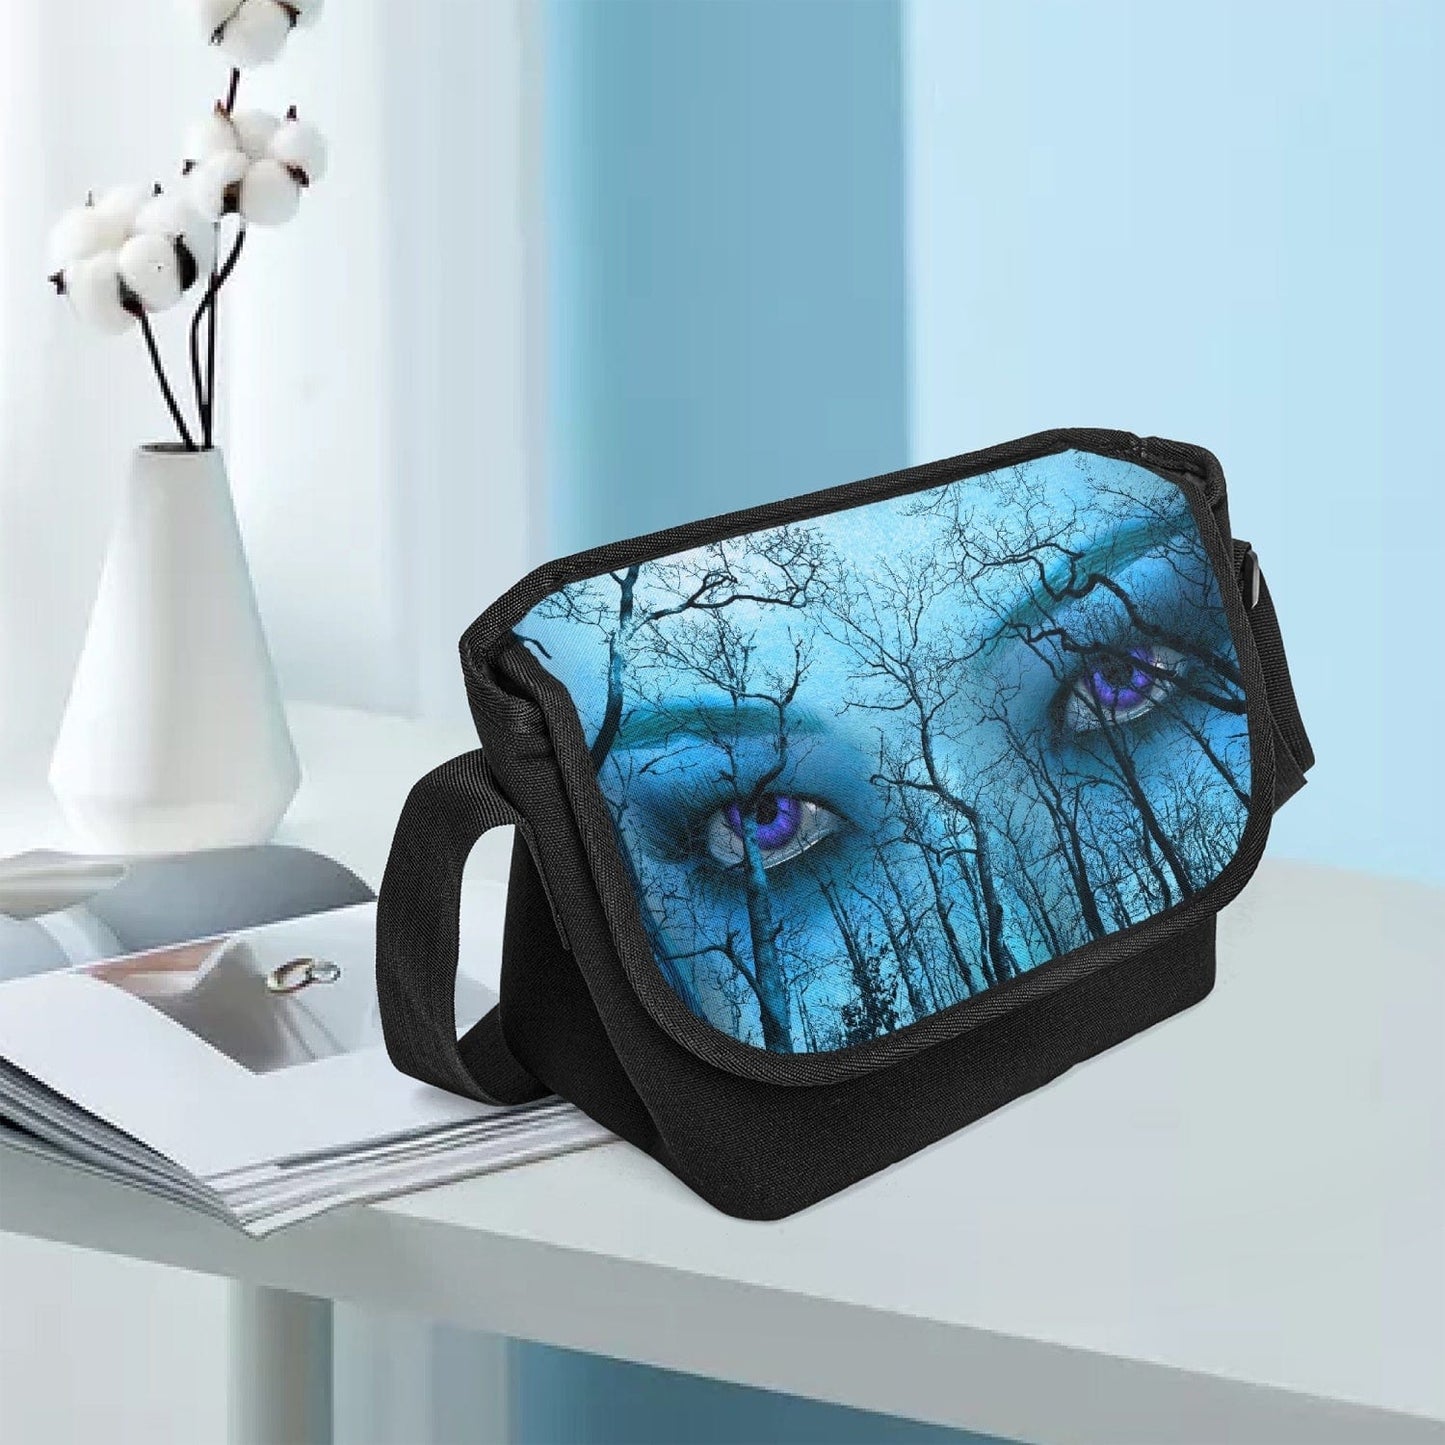 Shown sitting on a desk in a Canberra government office is this canvas messenger bag at Gallery Serpentine.  Piercing all seeing purple eyes and Blue and aqua tones give this a supernatural feel with a gothic naturecore theme.